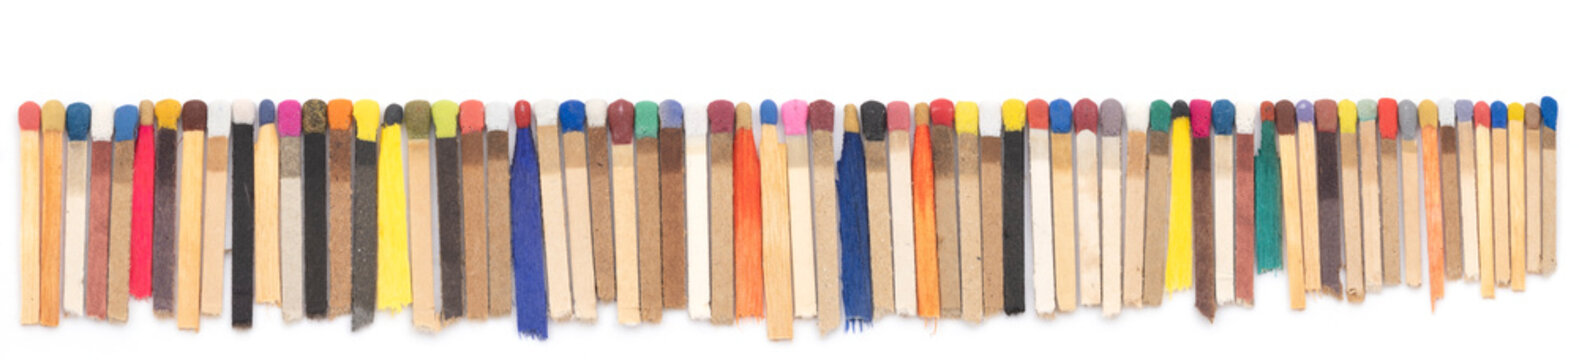 multicolored matchsticks on white paper